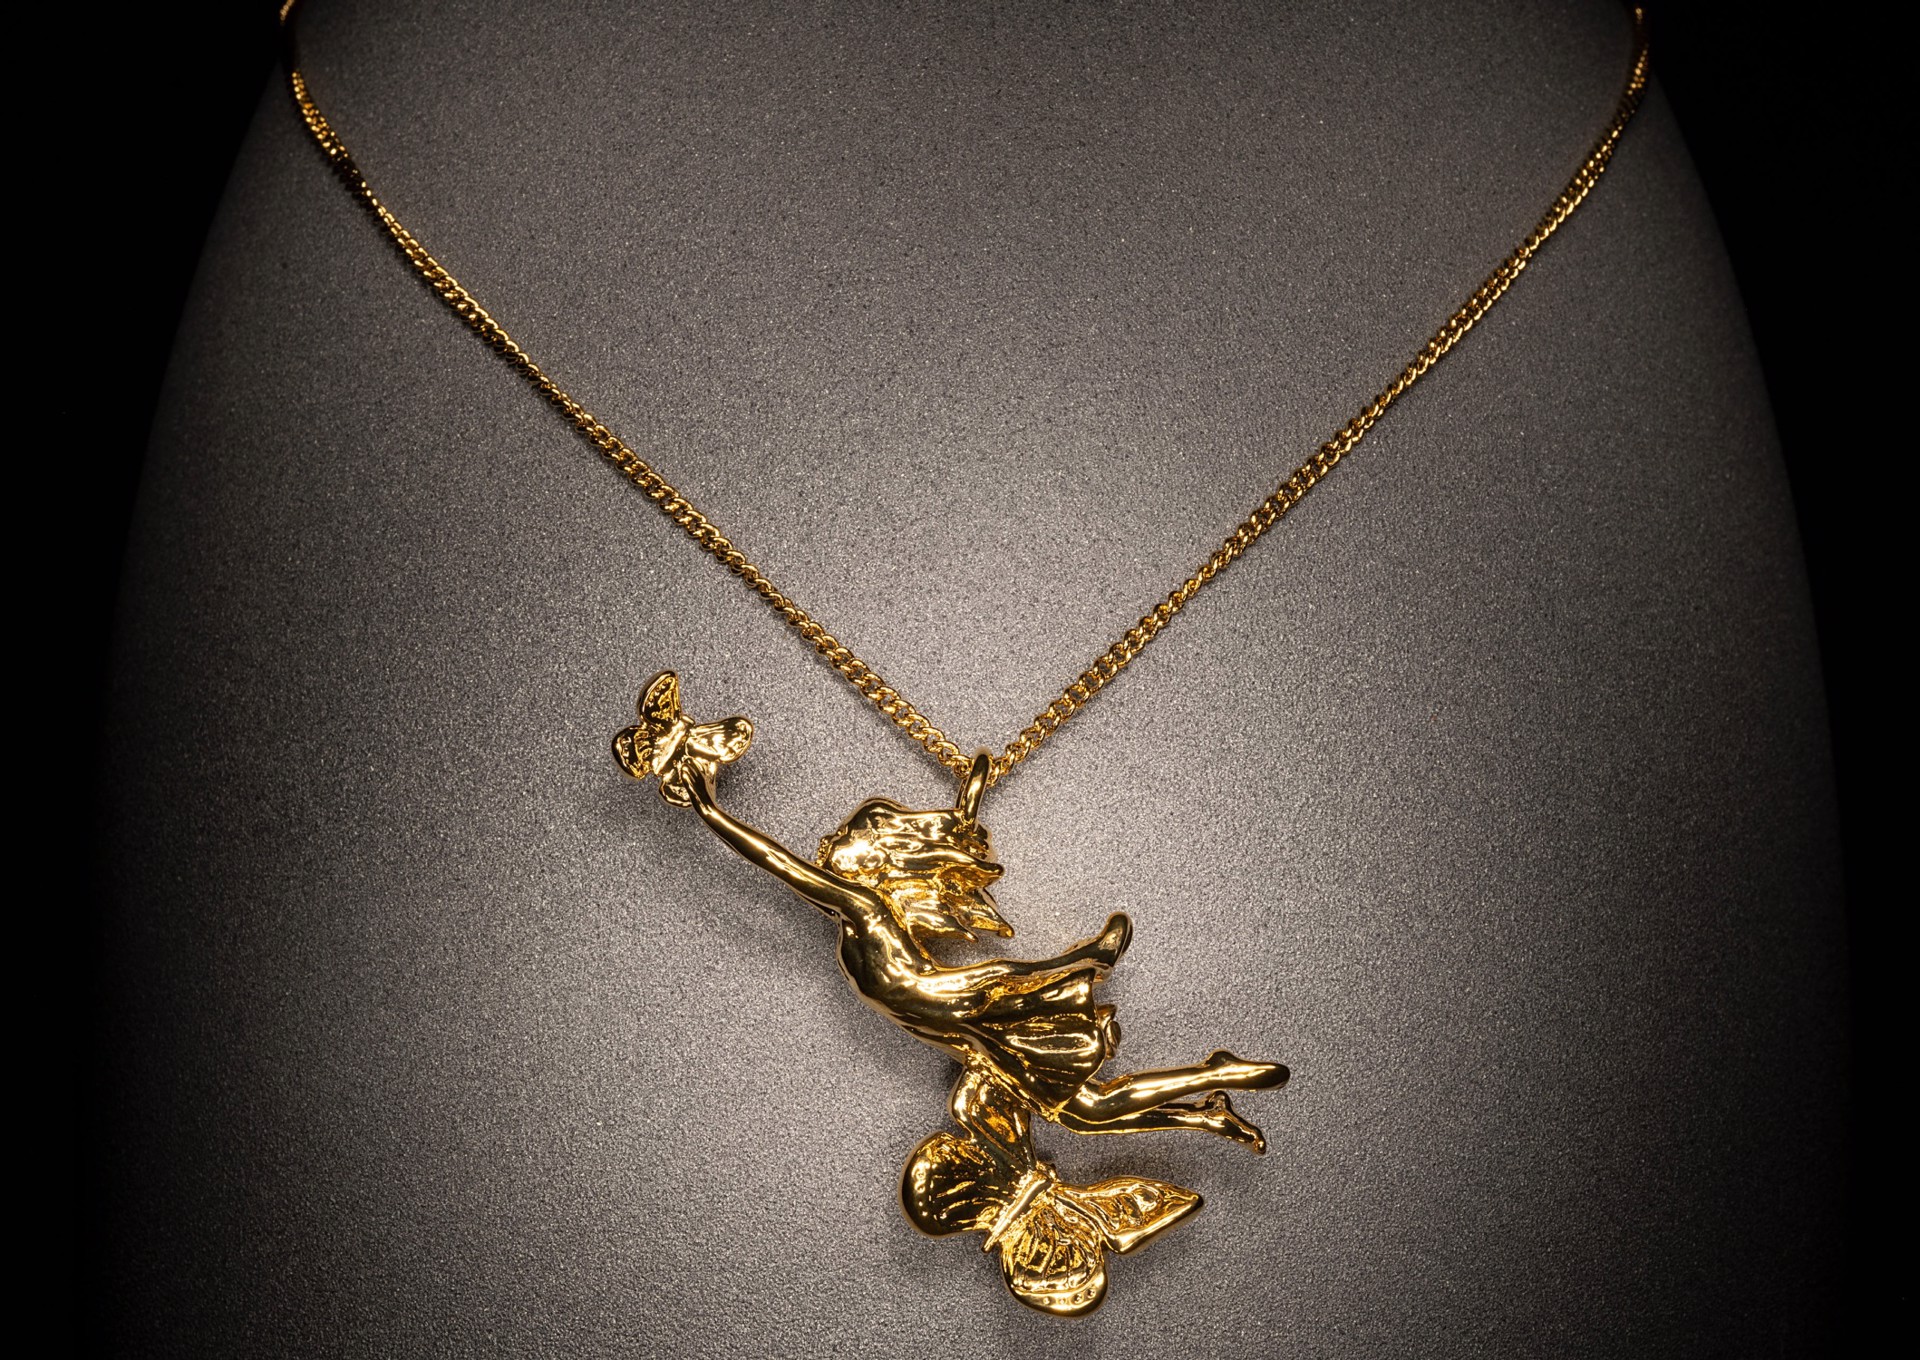 Lift Her with Butterflies Necklace - Gold Plate by Angela Mia